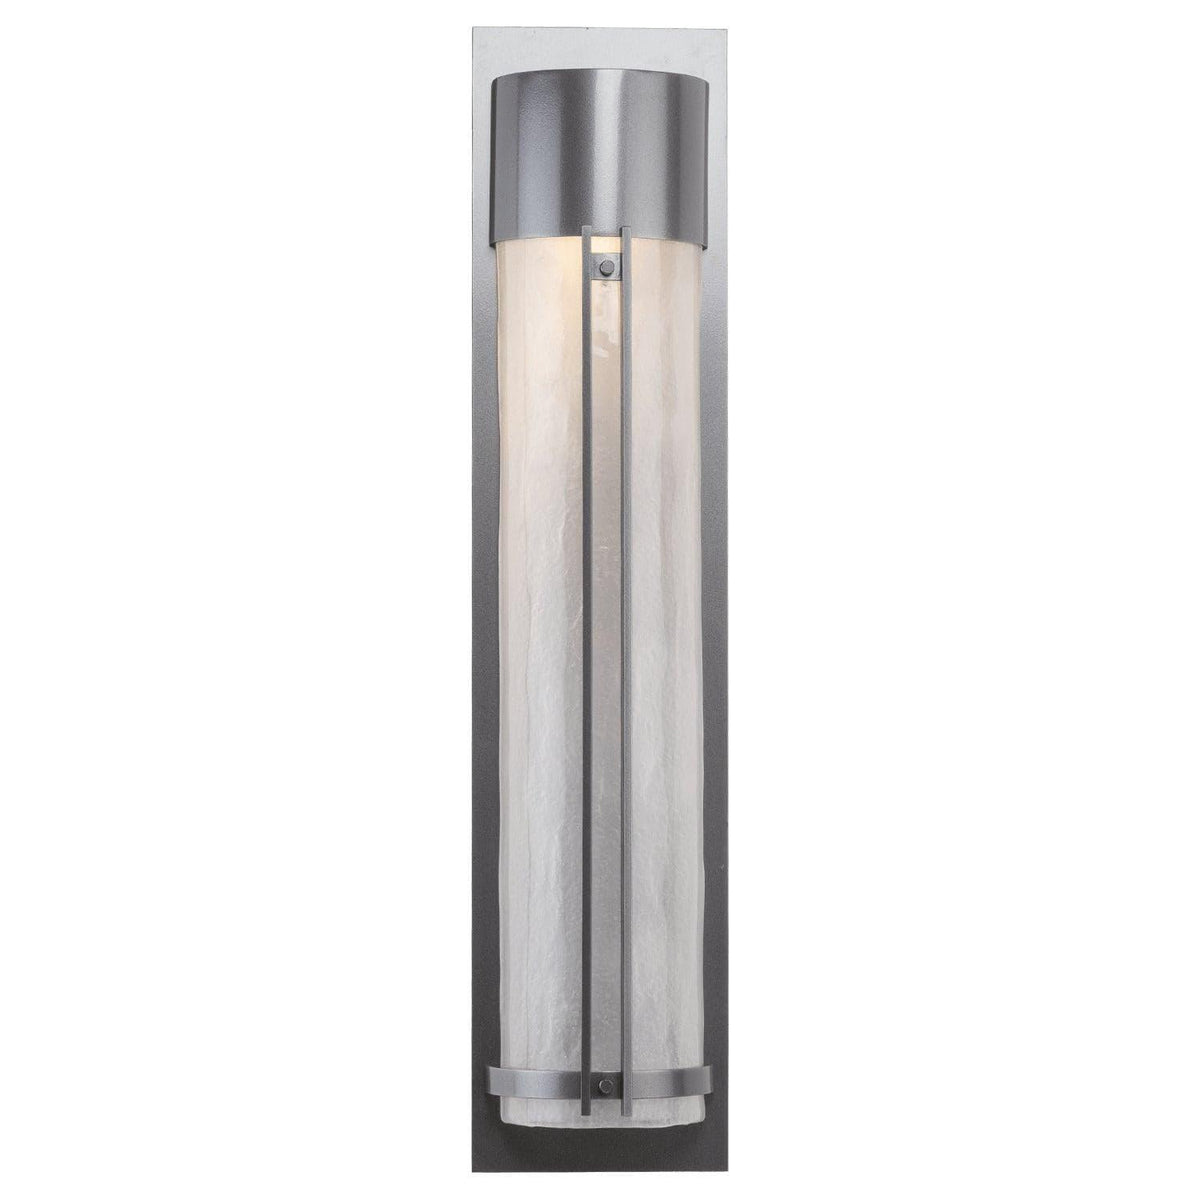 Hammerton Studio - Outdoor Tall Round Cover Sconce with Metalwork - ODB0054-31-AG-FG-G1 | Montreal Lighting & Hardware